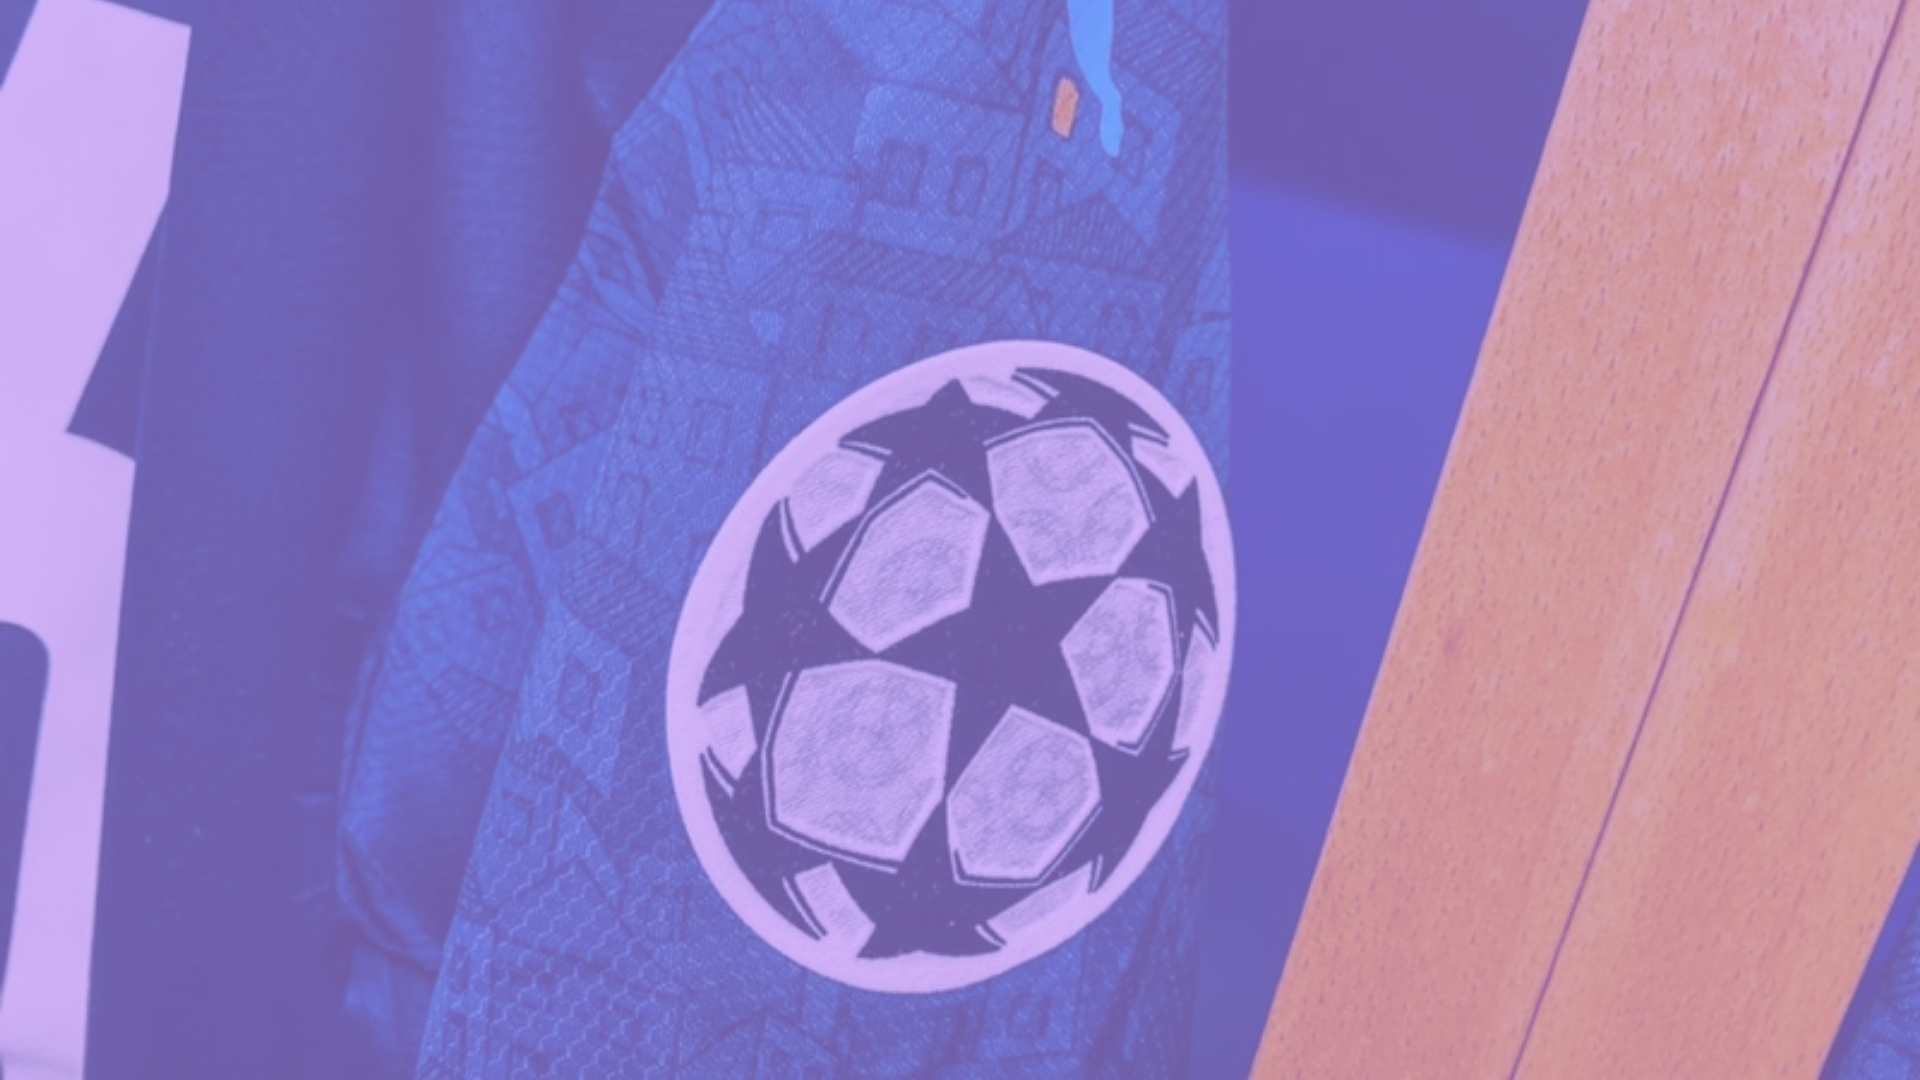 History of the champions league sleeve patch